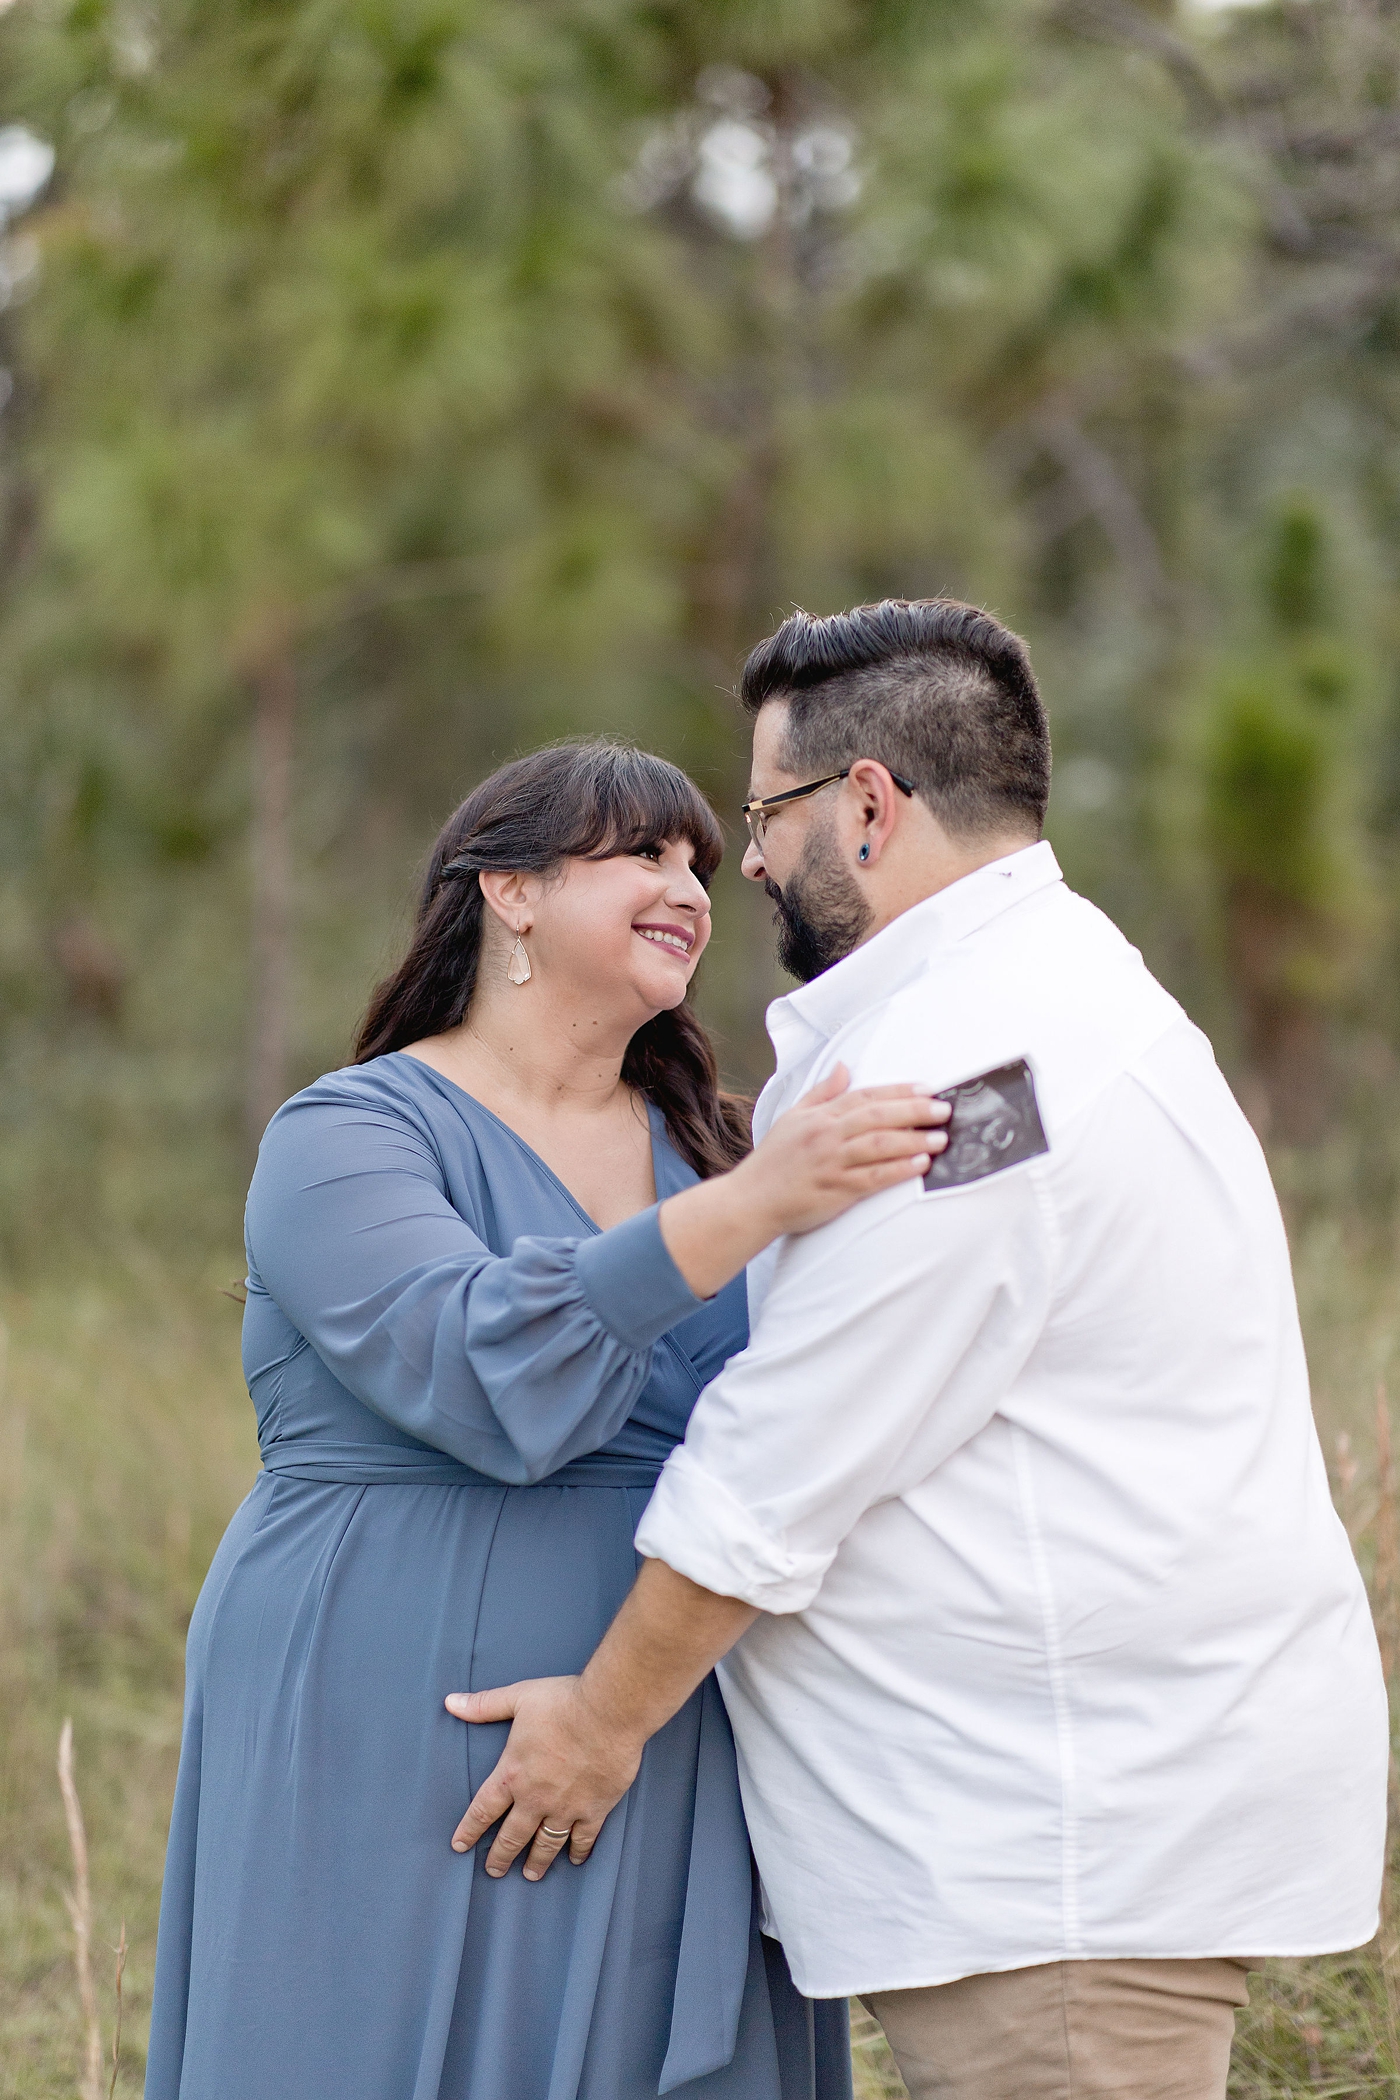 Mom holds ultrasound during mother nature inspired maternity session. Photo by Ivanna Vidal Photography.